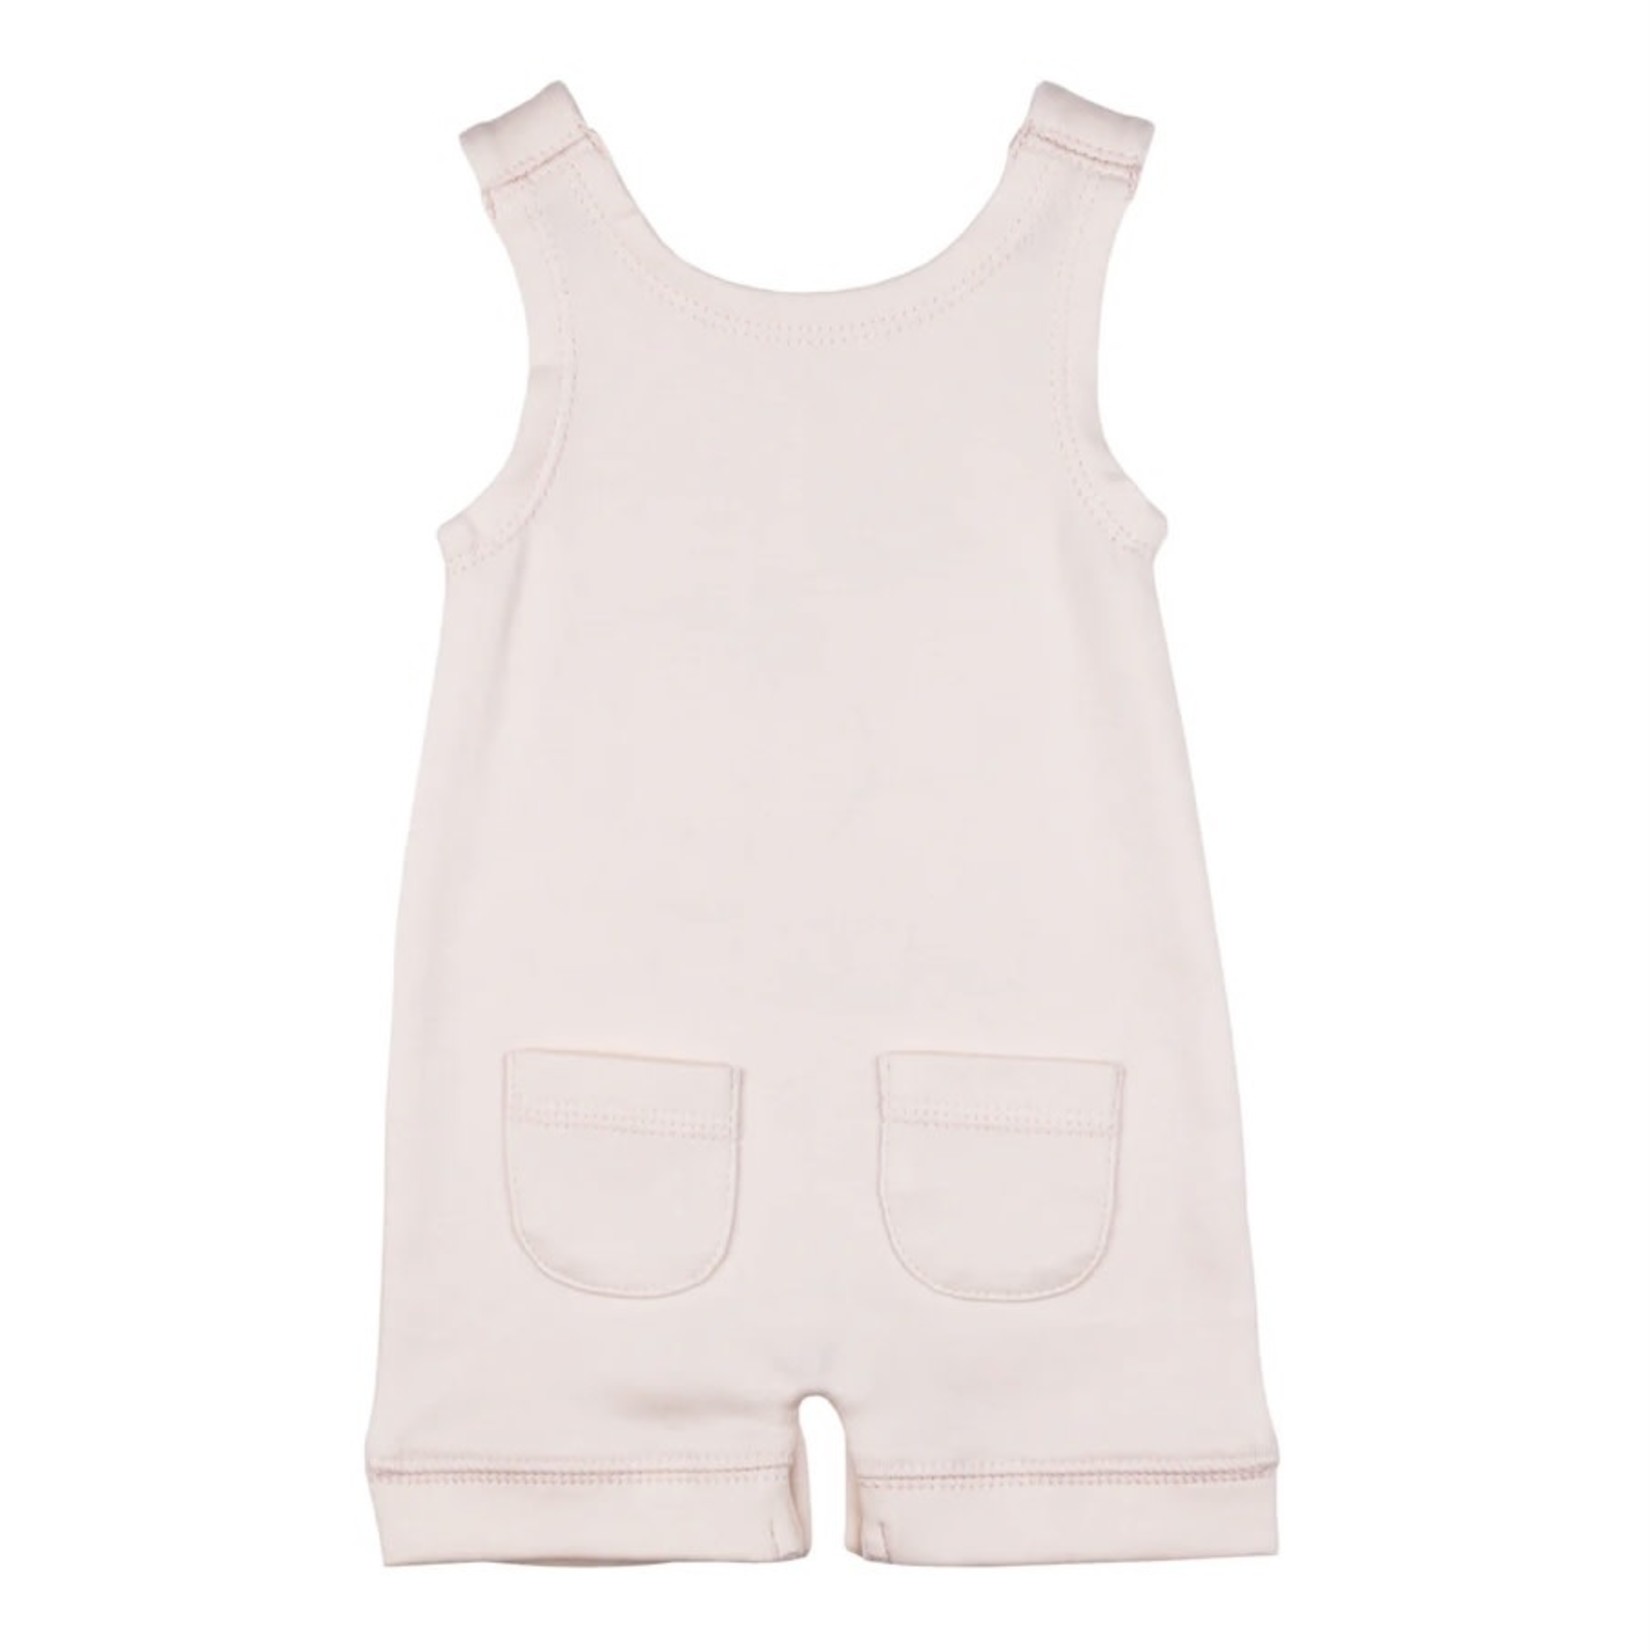 L’oved Baby L’oved Baby - Tomato Organic Sleeveless Romper